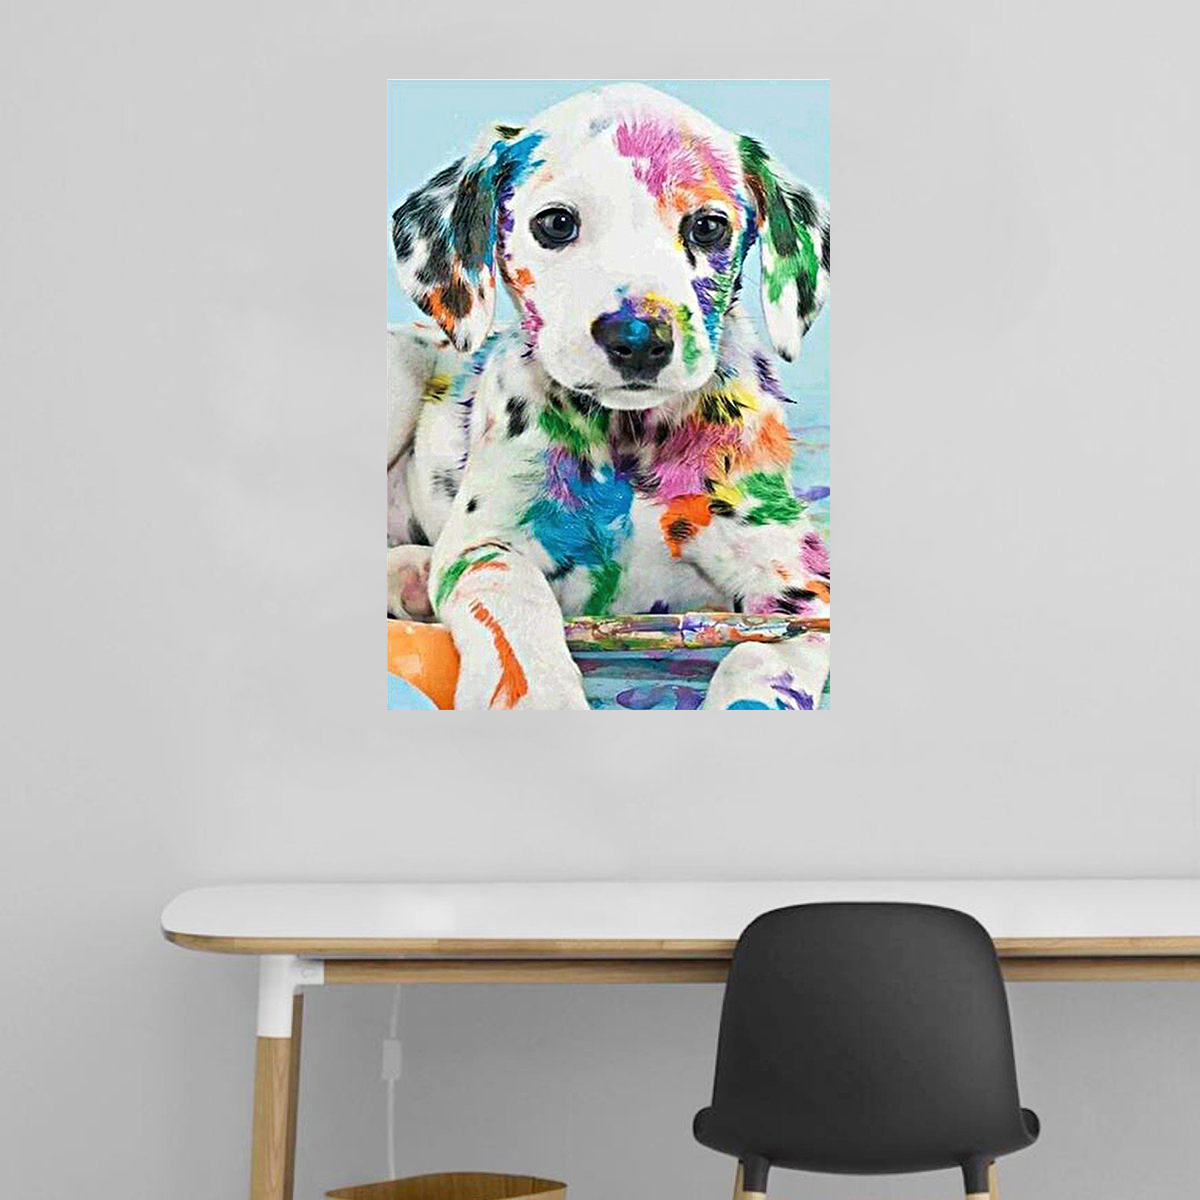 DIY-Diamond-Painting-Animal-Dog-Wall-Painting-Hanging-Pictures-Handmade-Wall-Decorations-Gifts-Drawi-1744046-10